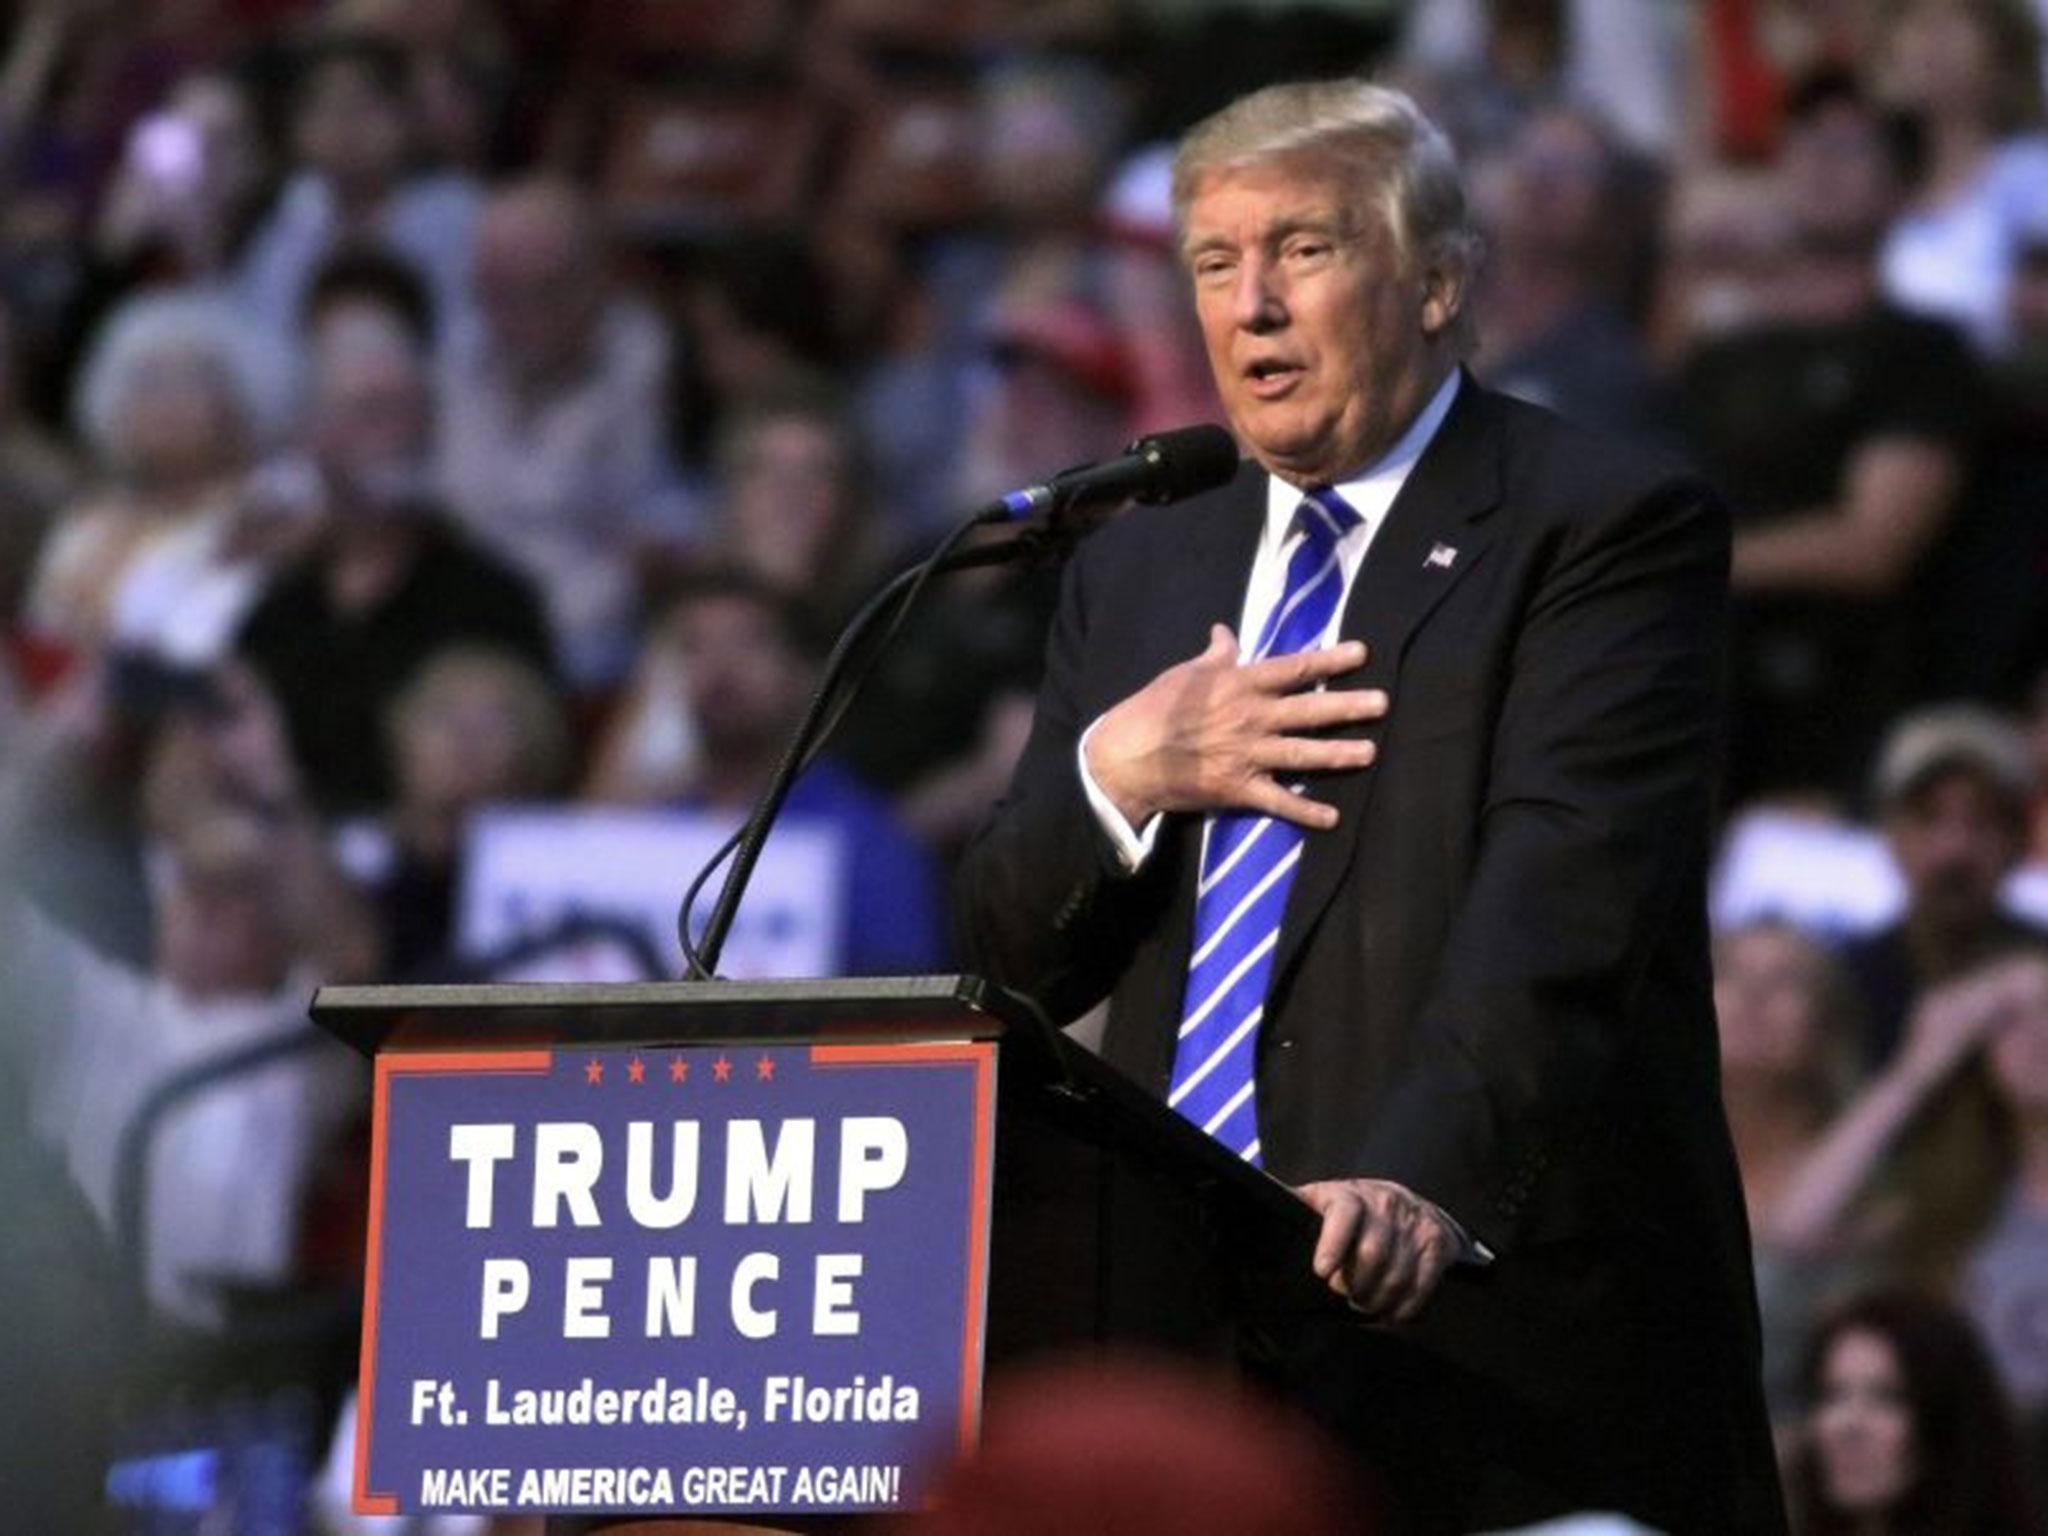 File picture shows US Republican presidential nominee Donald Trump speaking during a campaign event at the BB&T Center in Sunrise, Florida, USA, on 10 August, 2016